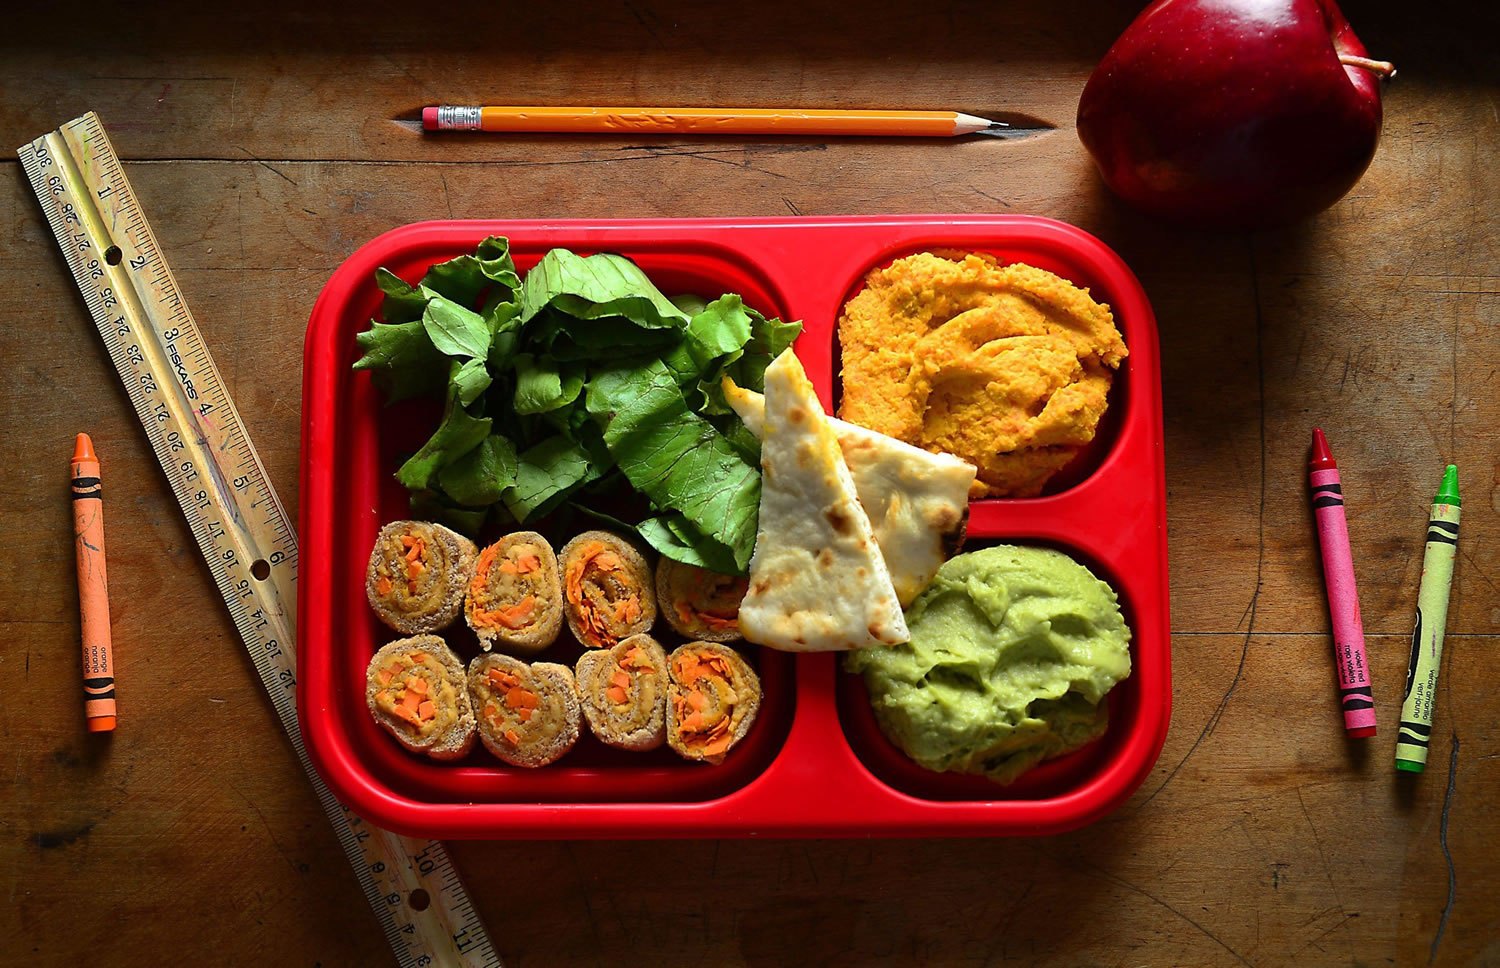 This lunchbox serves up appealing hues and nutritious veggies: pita wedges with colorful hummus dips made with carrots, avocado and beets, along with carrot hummus &quot;sushi&quot; rolls.